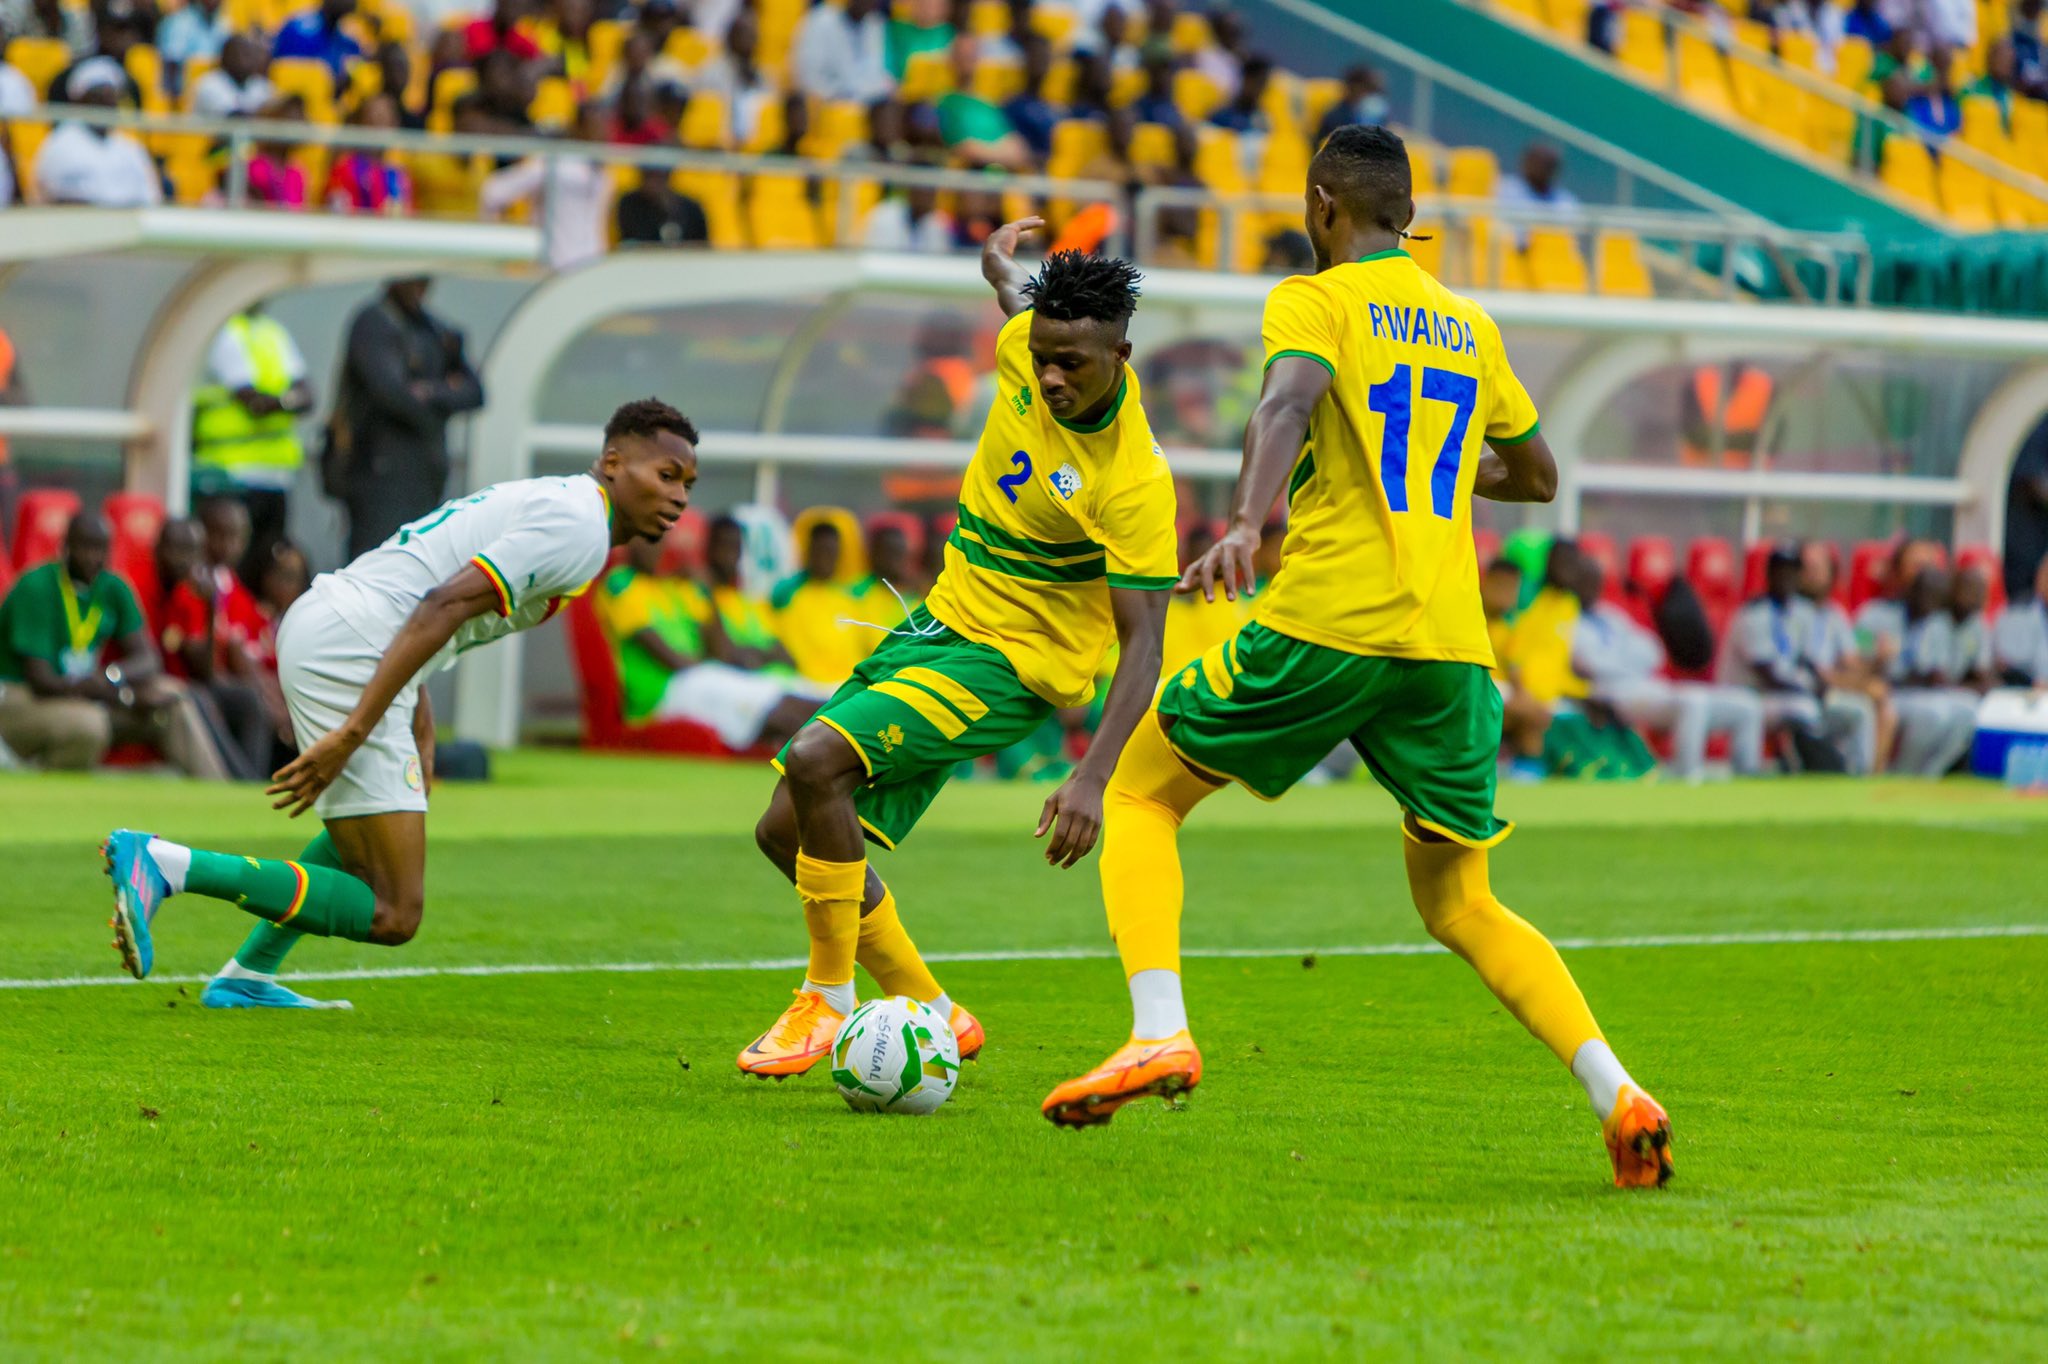 Amavubi left back Emmanuel Imanishimwe with the ball during the tie against Senegal in Dakar on June 7. The Morocco based defender has been in good form for both club and country. Photo: Courtesy.